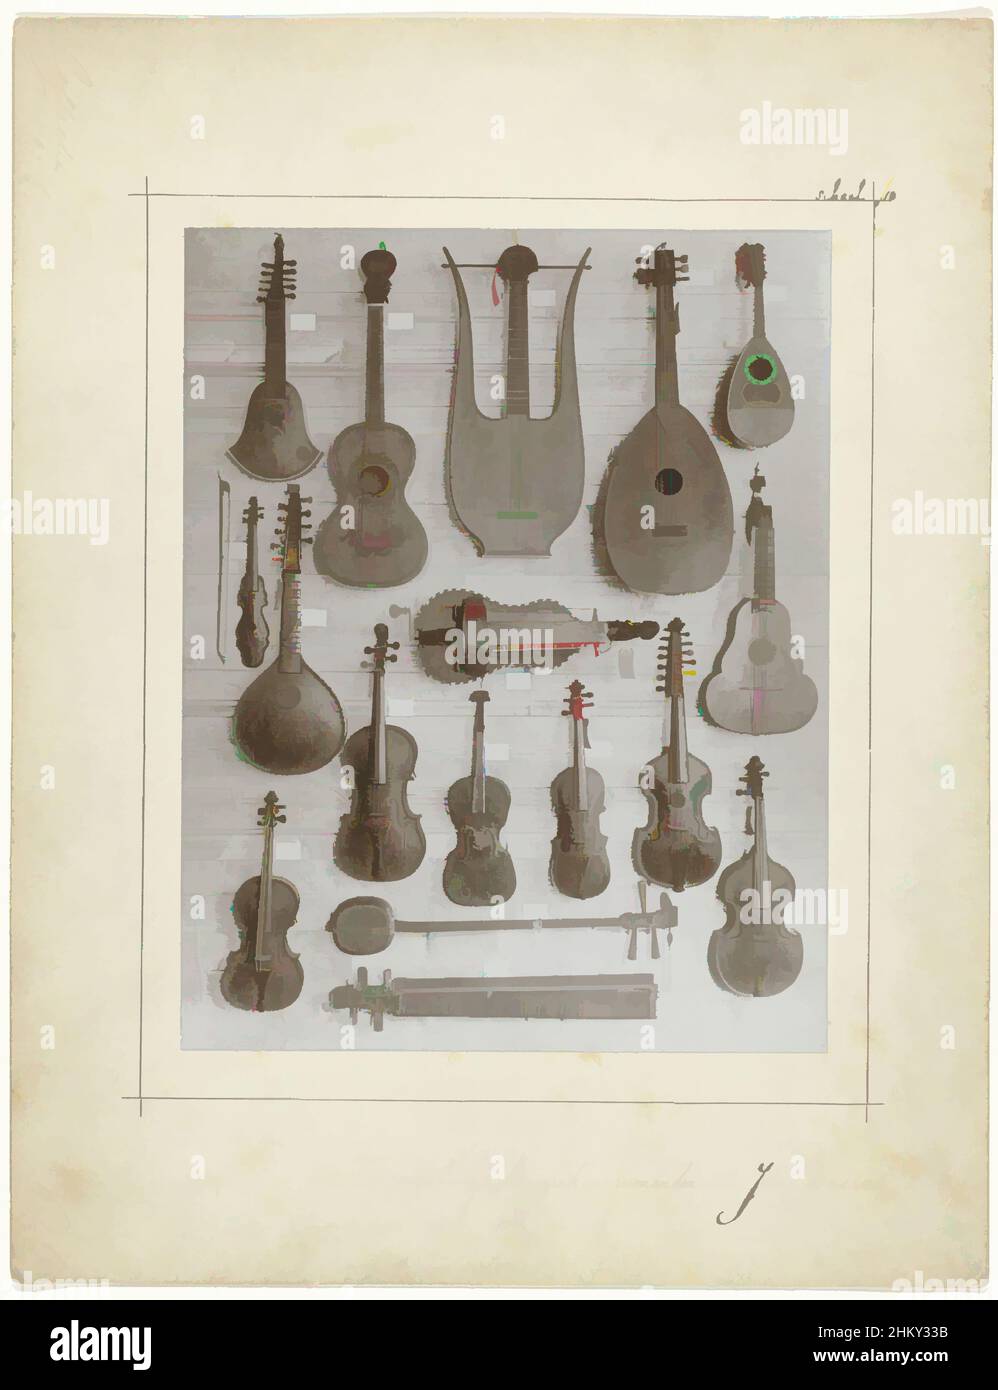 Art inspired by Collection of musical instruments from the collection of the composer J.C. Boers: stringed instruments, Collection of Musical Instruments of J.C. Boers, Frederik Christiaan Filip Gräfe, Delft, 1863 - c. 1905, paper, photographic support, height 208 mm × width 164, Classic works modernized by Artotop with a splash of modernity. Shapes, color and value, eye-catching visual impact on art. Emotions through freedom of artworks in a contemporary way. A timeless message pursuing a wildly creative new direction. Artists turning to the digital medium and creating the Artotop NFT Stock Photo